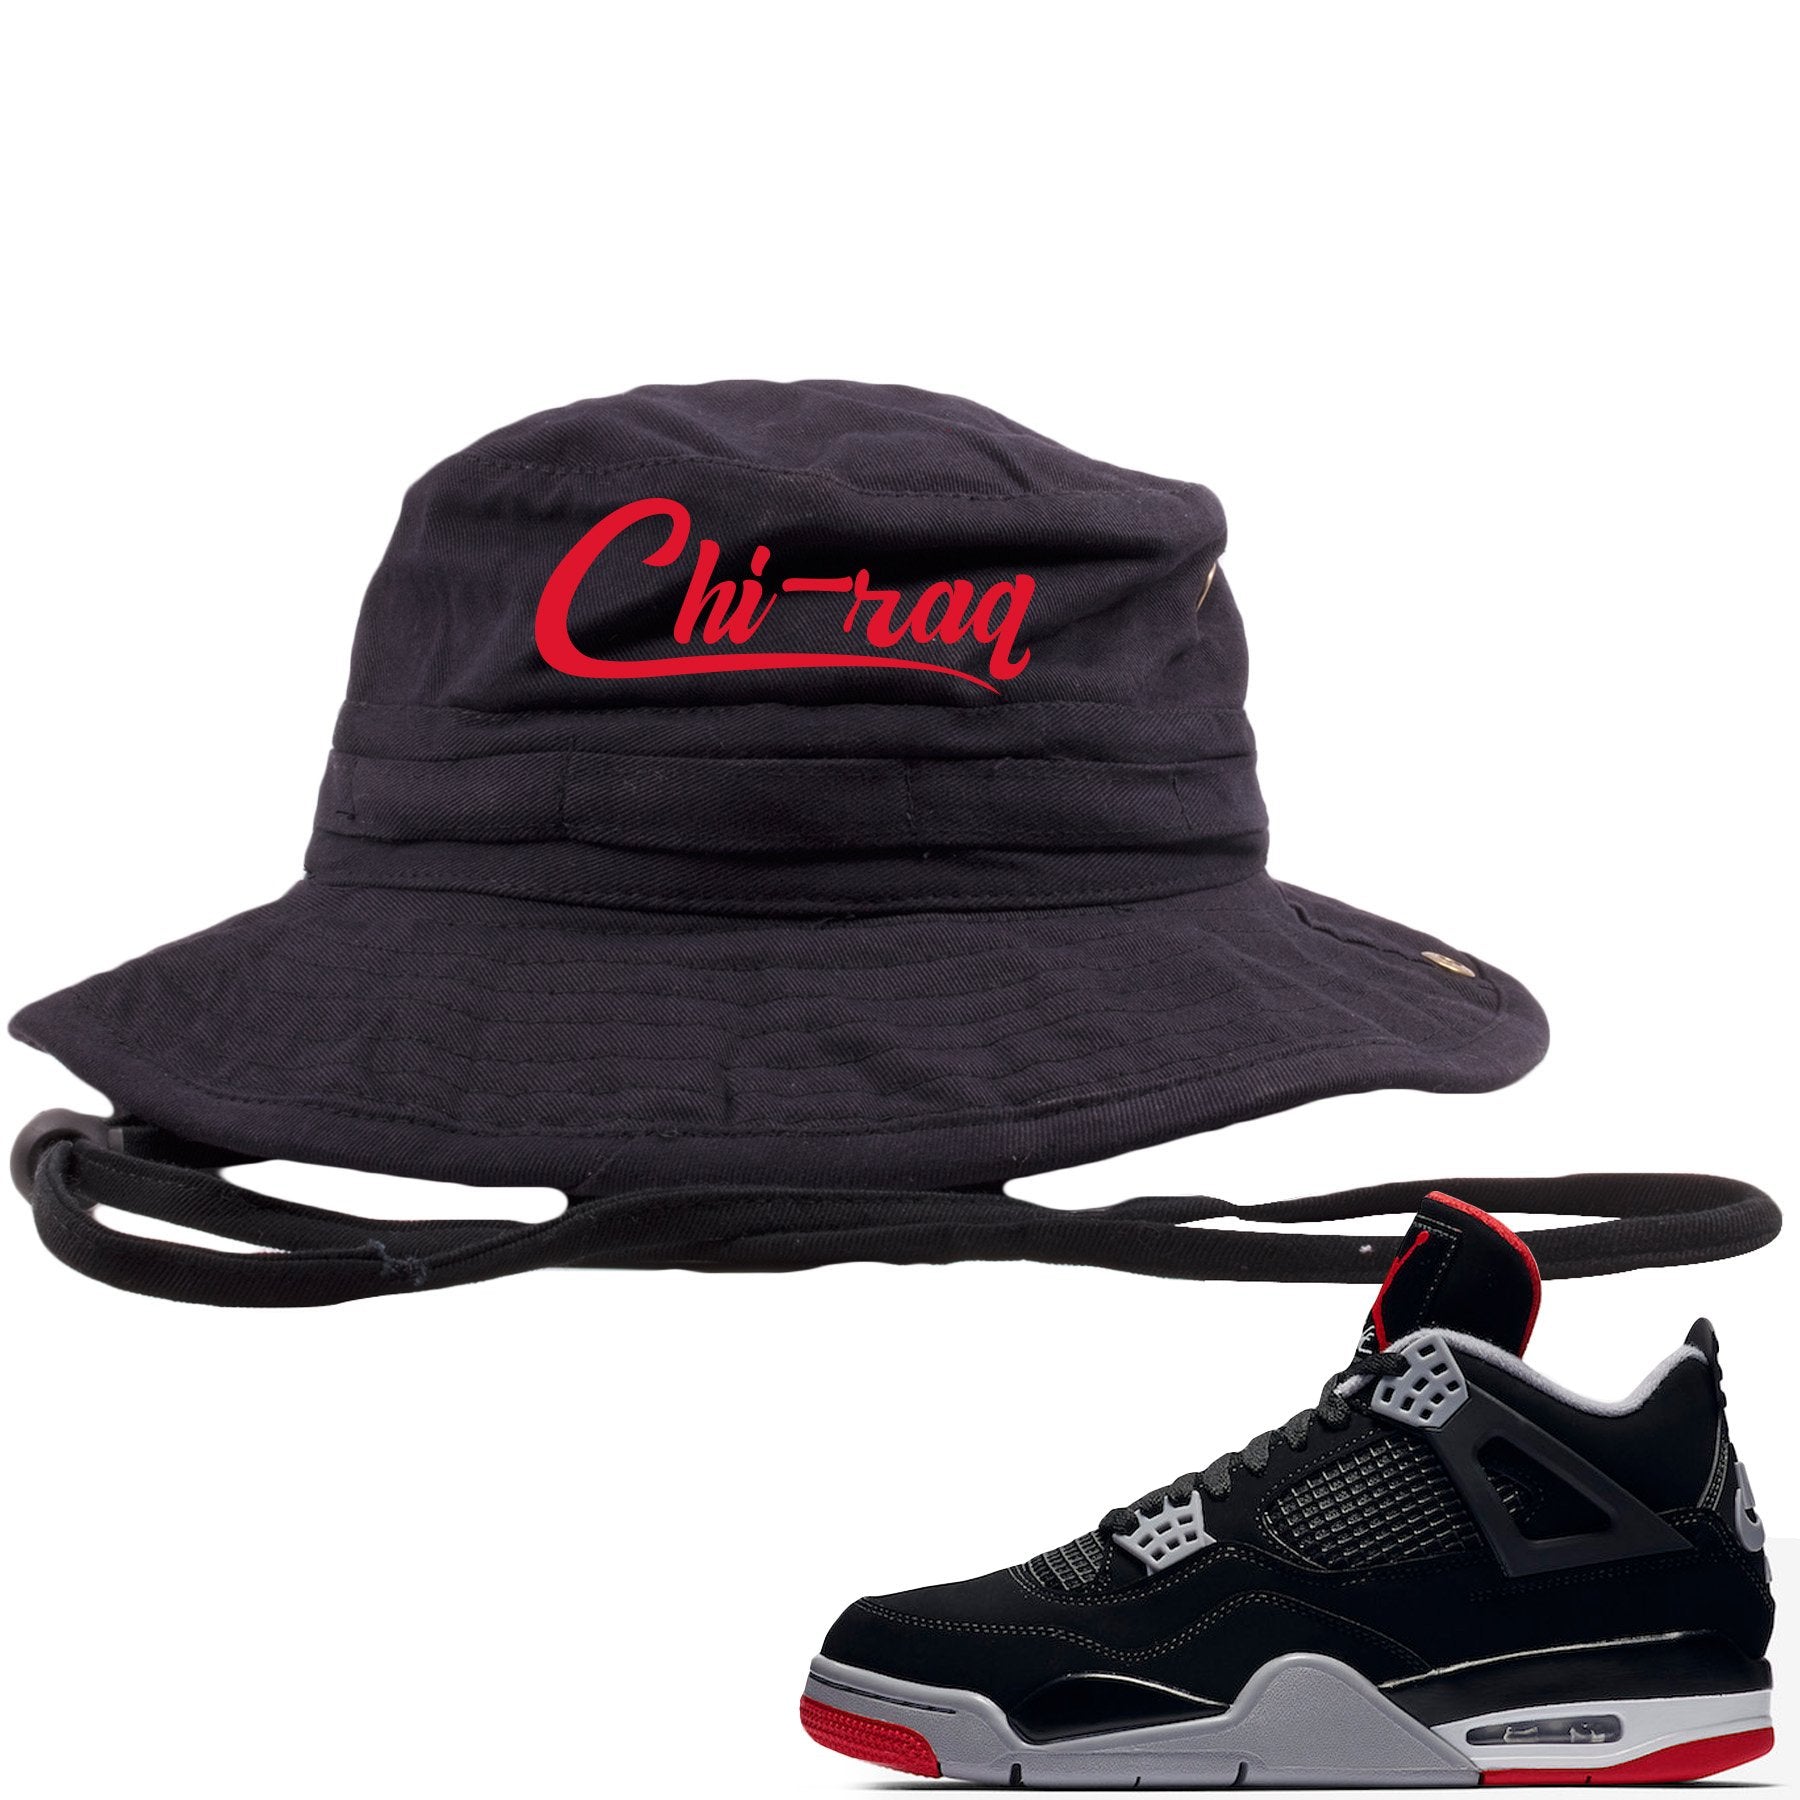 This black and red bucket hat will match great with your Air Jordan 4 Bred shoes